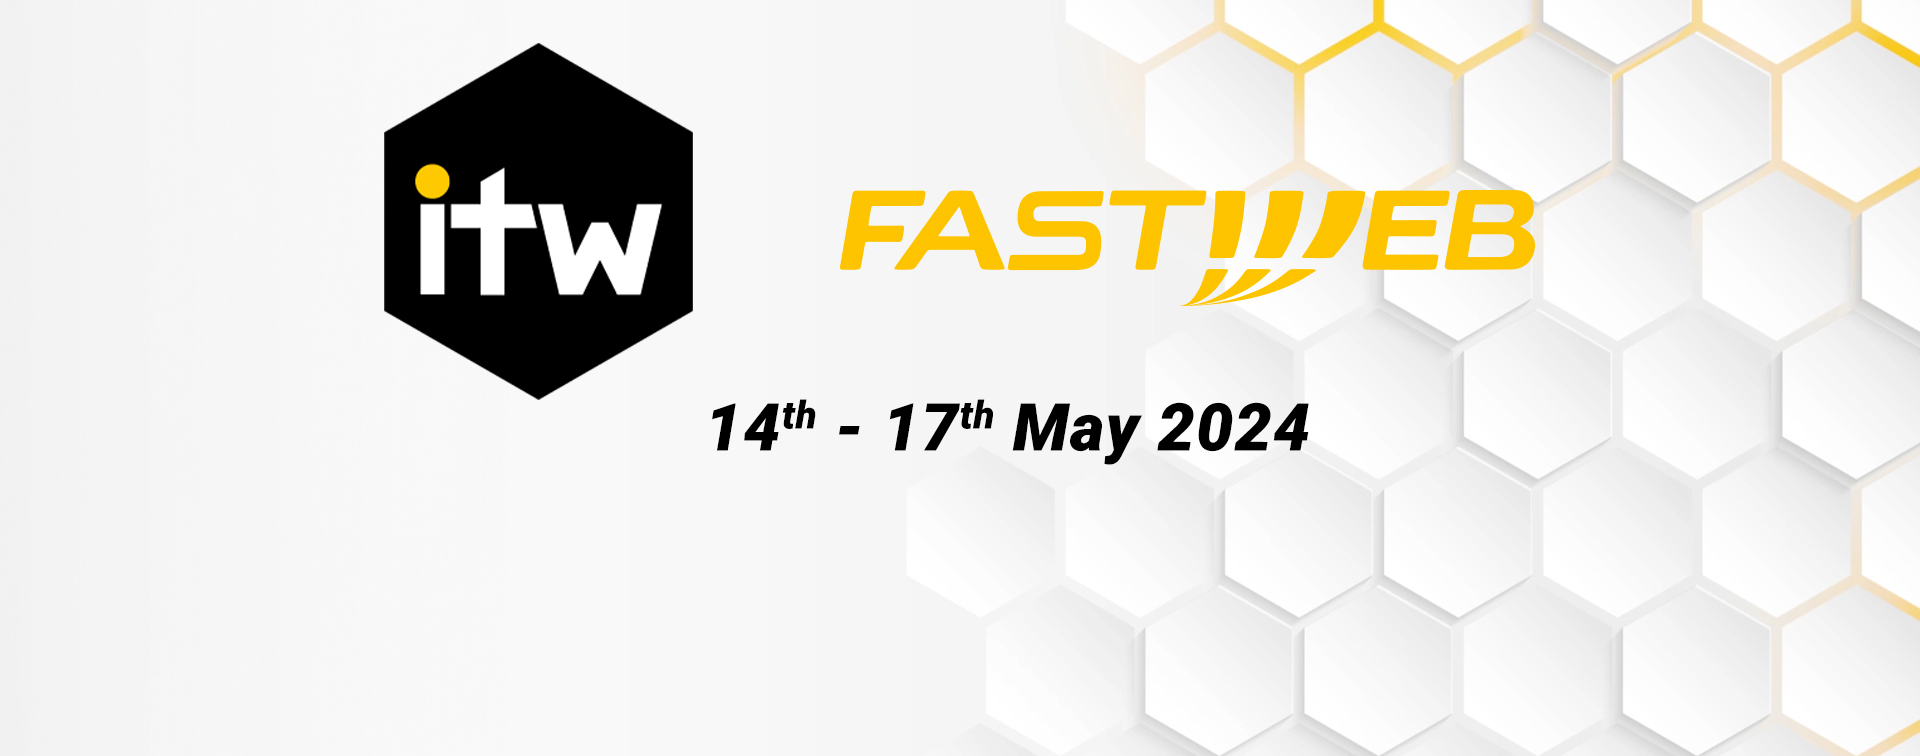 Meet the Fastweb Wholesale Team at the ITW. Room #4007 and #4009